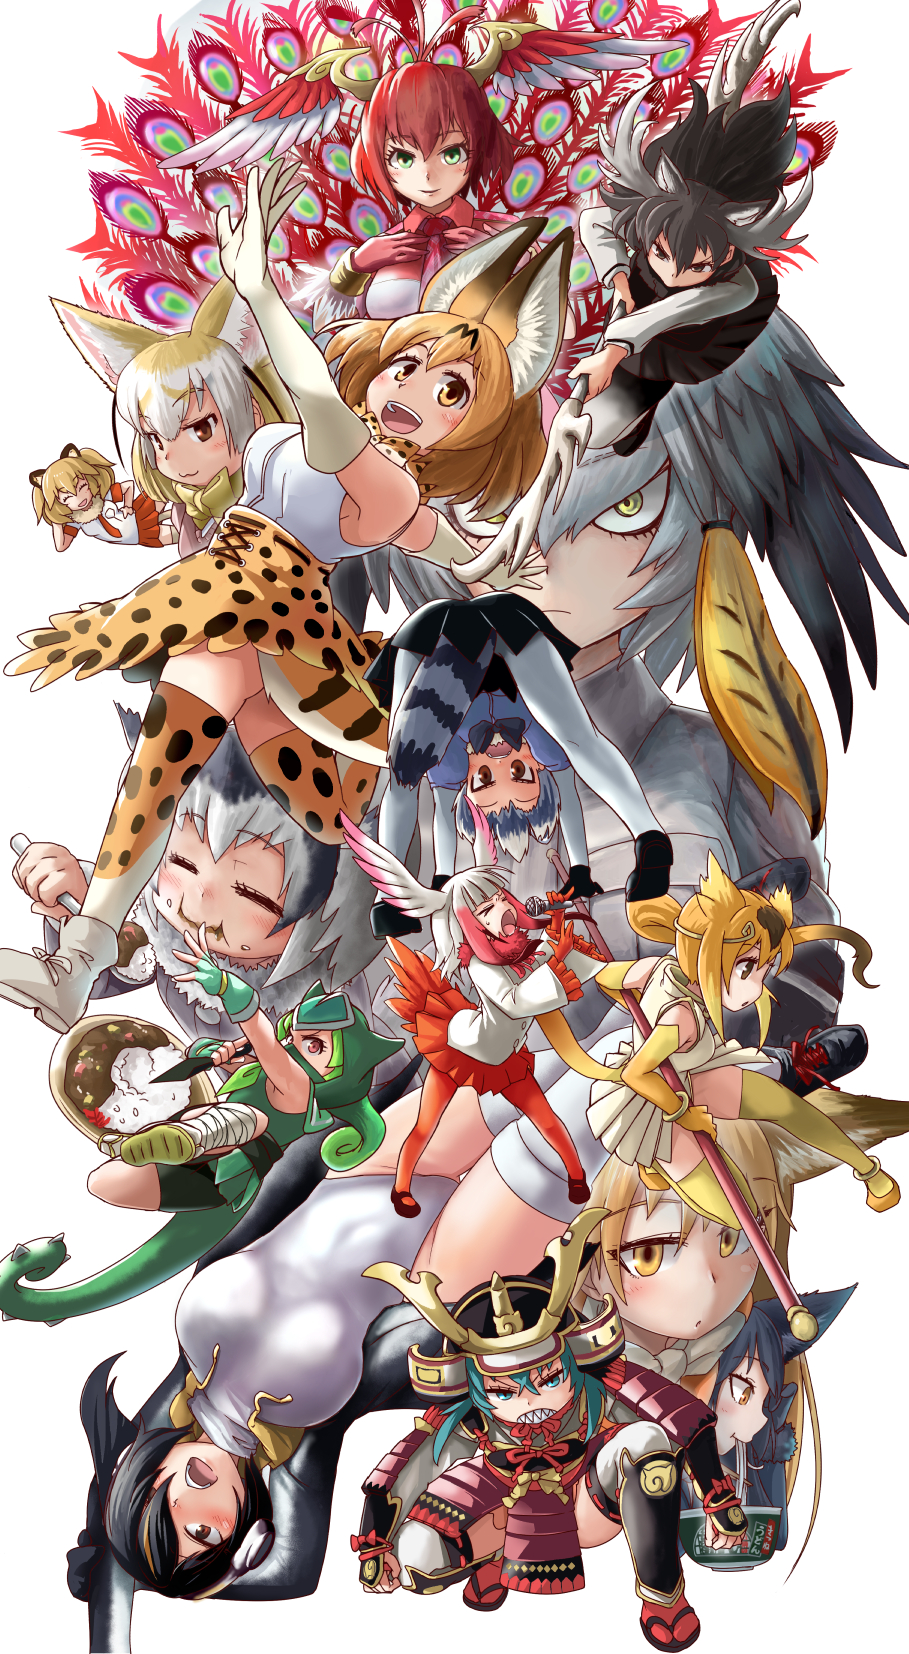 &gt;_&lt; 6+girls :3 :d animal_ear_fluff animal_ears ankle_wrap antlers armor bangs bare_shoulders bird_tail blonde_hair blunt_bangs brown_eyes chameleon_tail circlet clenched_teeth commentary_request common_raccoon_(kemono_friends) curry curry_rice d: doitsuken eating elbow_gloves emperor_penguin_(kemono_friends) extra_ears eyebrows_visible_through_hair ezo_red_fox_(kemono_friends) fennec_(kemono_friends) fingerless_gloves food food_on_face fox_ears frown gloves golden_snub-nosed_monkey_(kemono_friends) green_eyes green_hair grey_hair hair_between_eyes hair_over_one_eye head_wings helmet highres japanese_armor japanese_crested_ibis_(kemono_friends) japari_symbol kabuto kemono_friends kunai leotard lion_(kemono_friends) long_hair looking_through_legs microphone moose_(kemono_friends) multicolored_hair multiple_girls music northern_white-faced_owl_(kemono_friends) open_mouth outstretched_arms panther_chameleon_(kemono_friends) pantyhose peacock_feathers pleated_skirt print_legwear print_skirt raccoon_tail red_gloves red_hair red_legwear red_skirt rice serval_(kemono_friends) serval_ears serval_print serval_tail sharp_teeth shirt shoebill_(kemono_friends) short_hair silver_fox_(kemono_friends) simple_background singing skirt smile spoon staff striped_tail suzaku_(kemono_friends) tail teeth thighhighs tsuchinoko_(kemono_friends) tsurime udon weapon white_background white_hair white_legwear white_leotard white_shirt white_skirt yellow_eyes yellow_gloves yellow_legwear